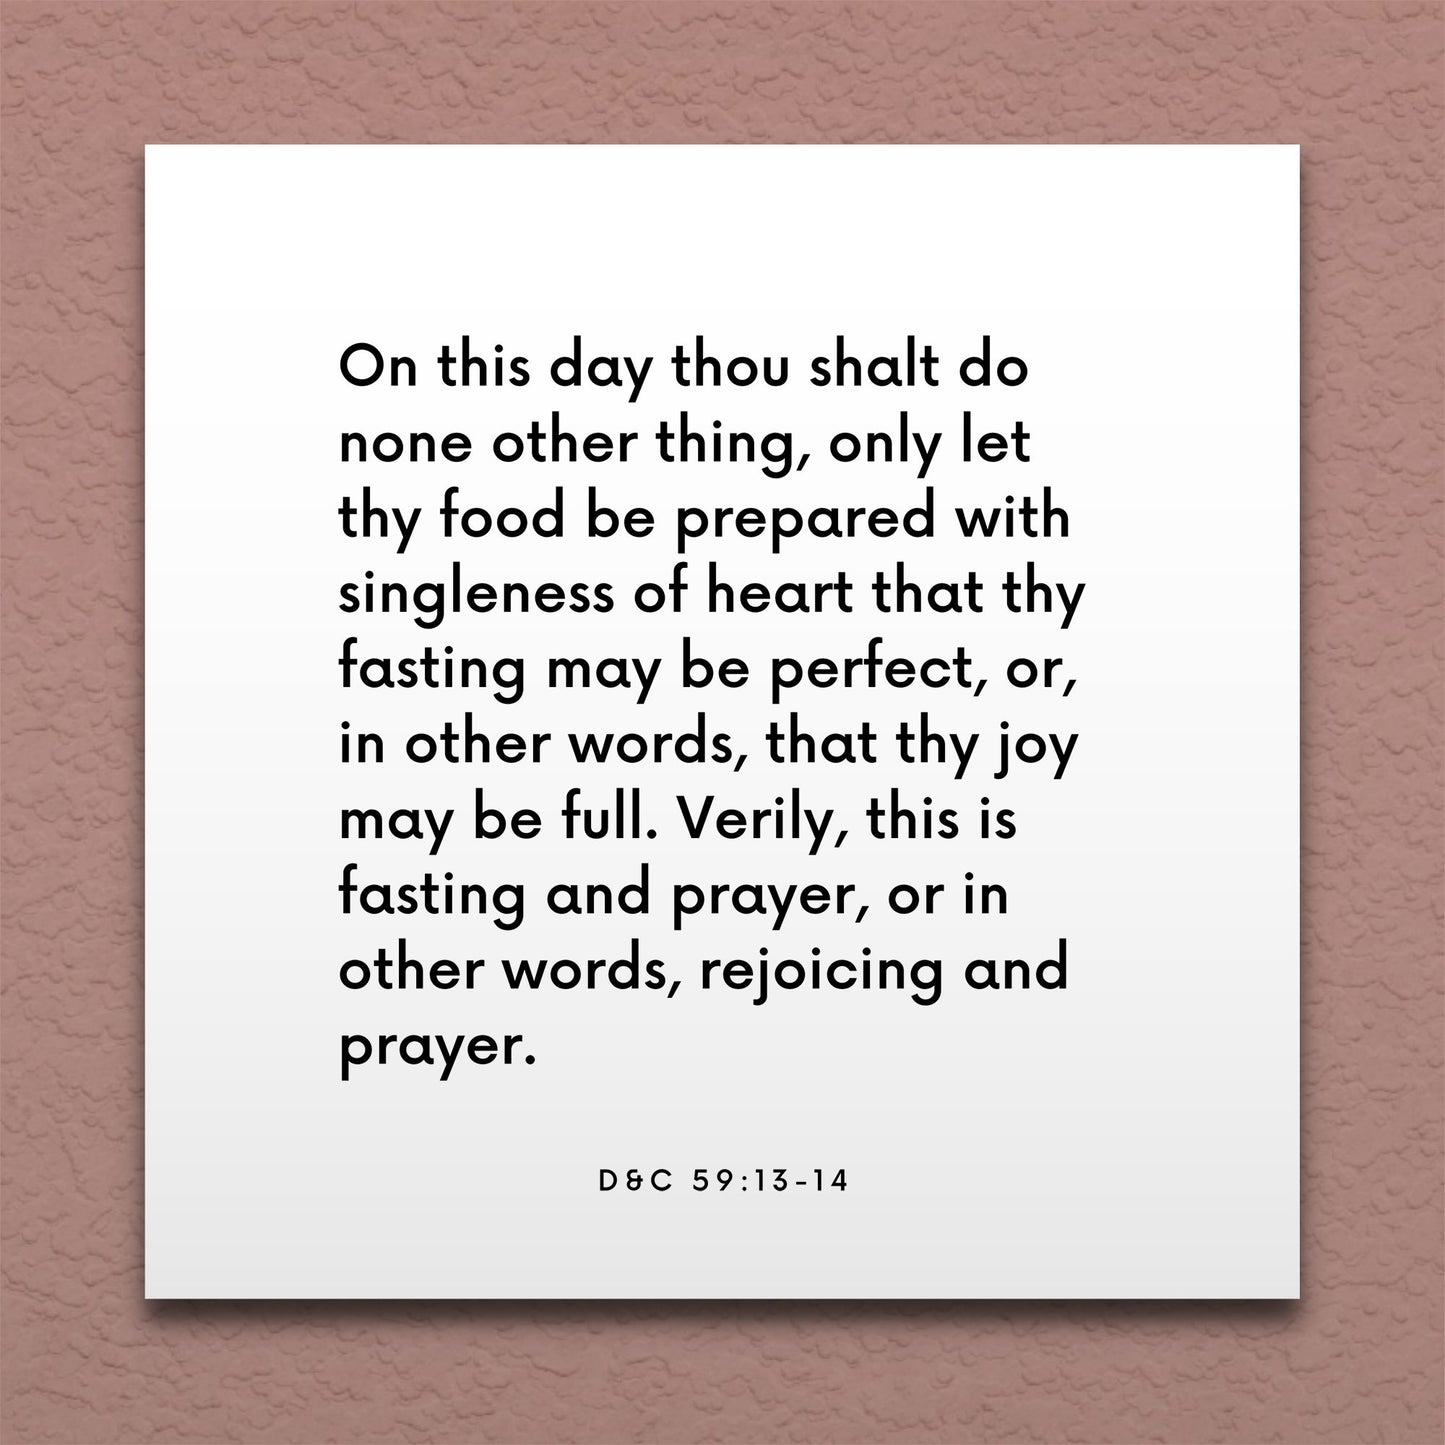 Wall-mounted scripture tile for D&C 59:13-14 - "That thy fasting may be perfect, that thy joy may be full"